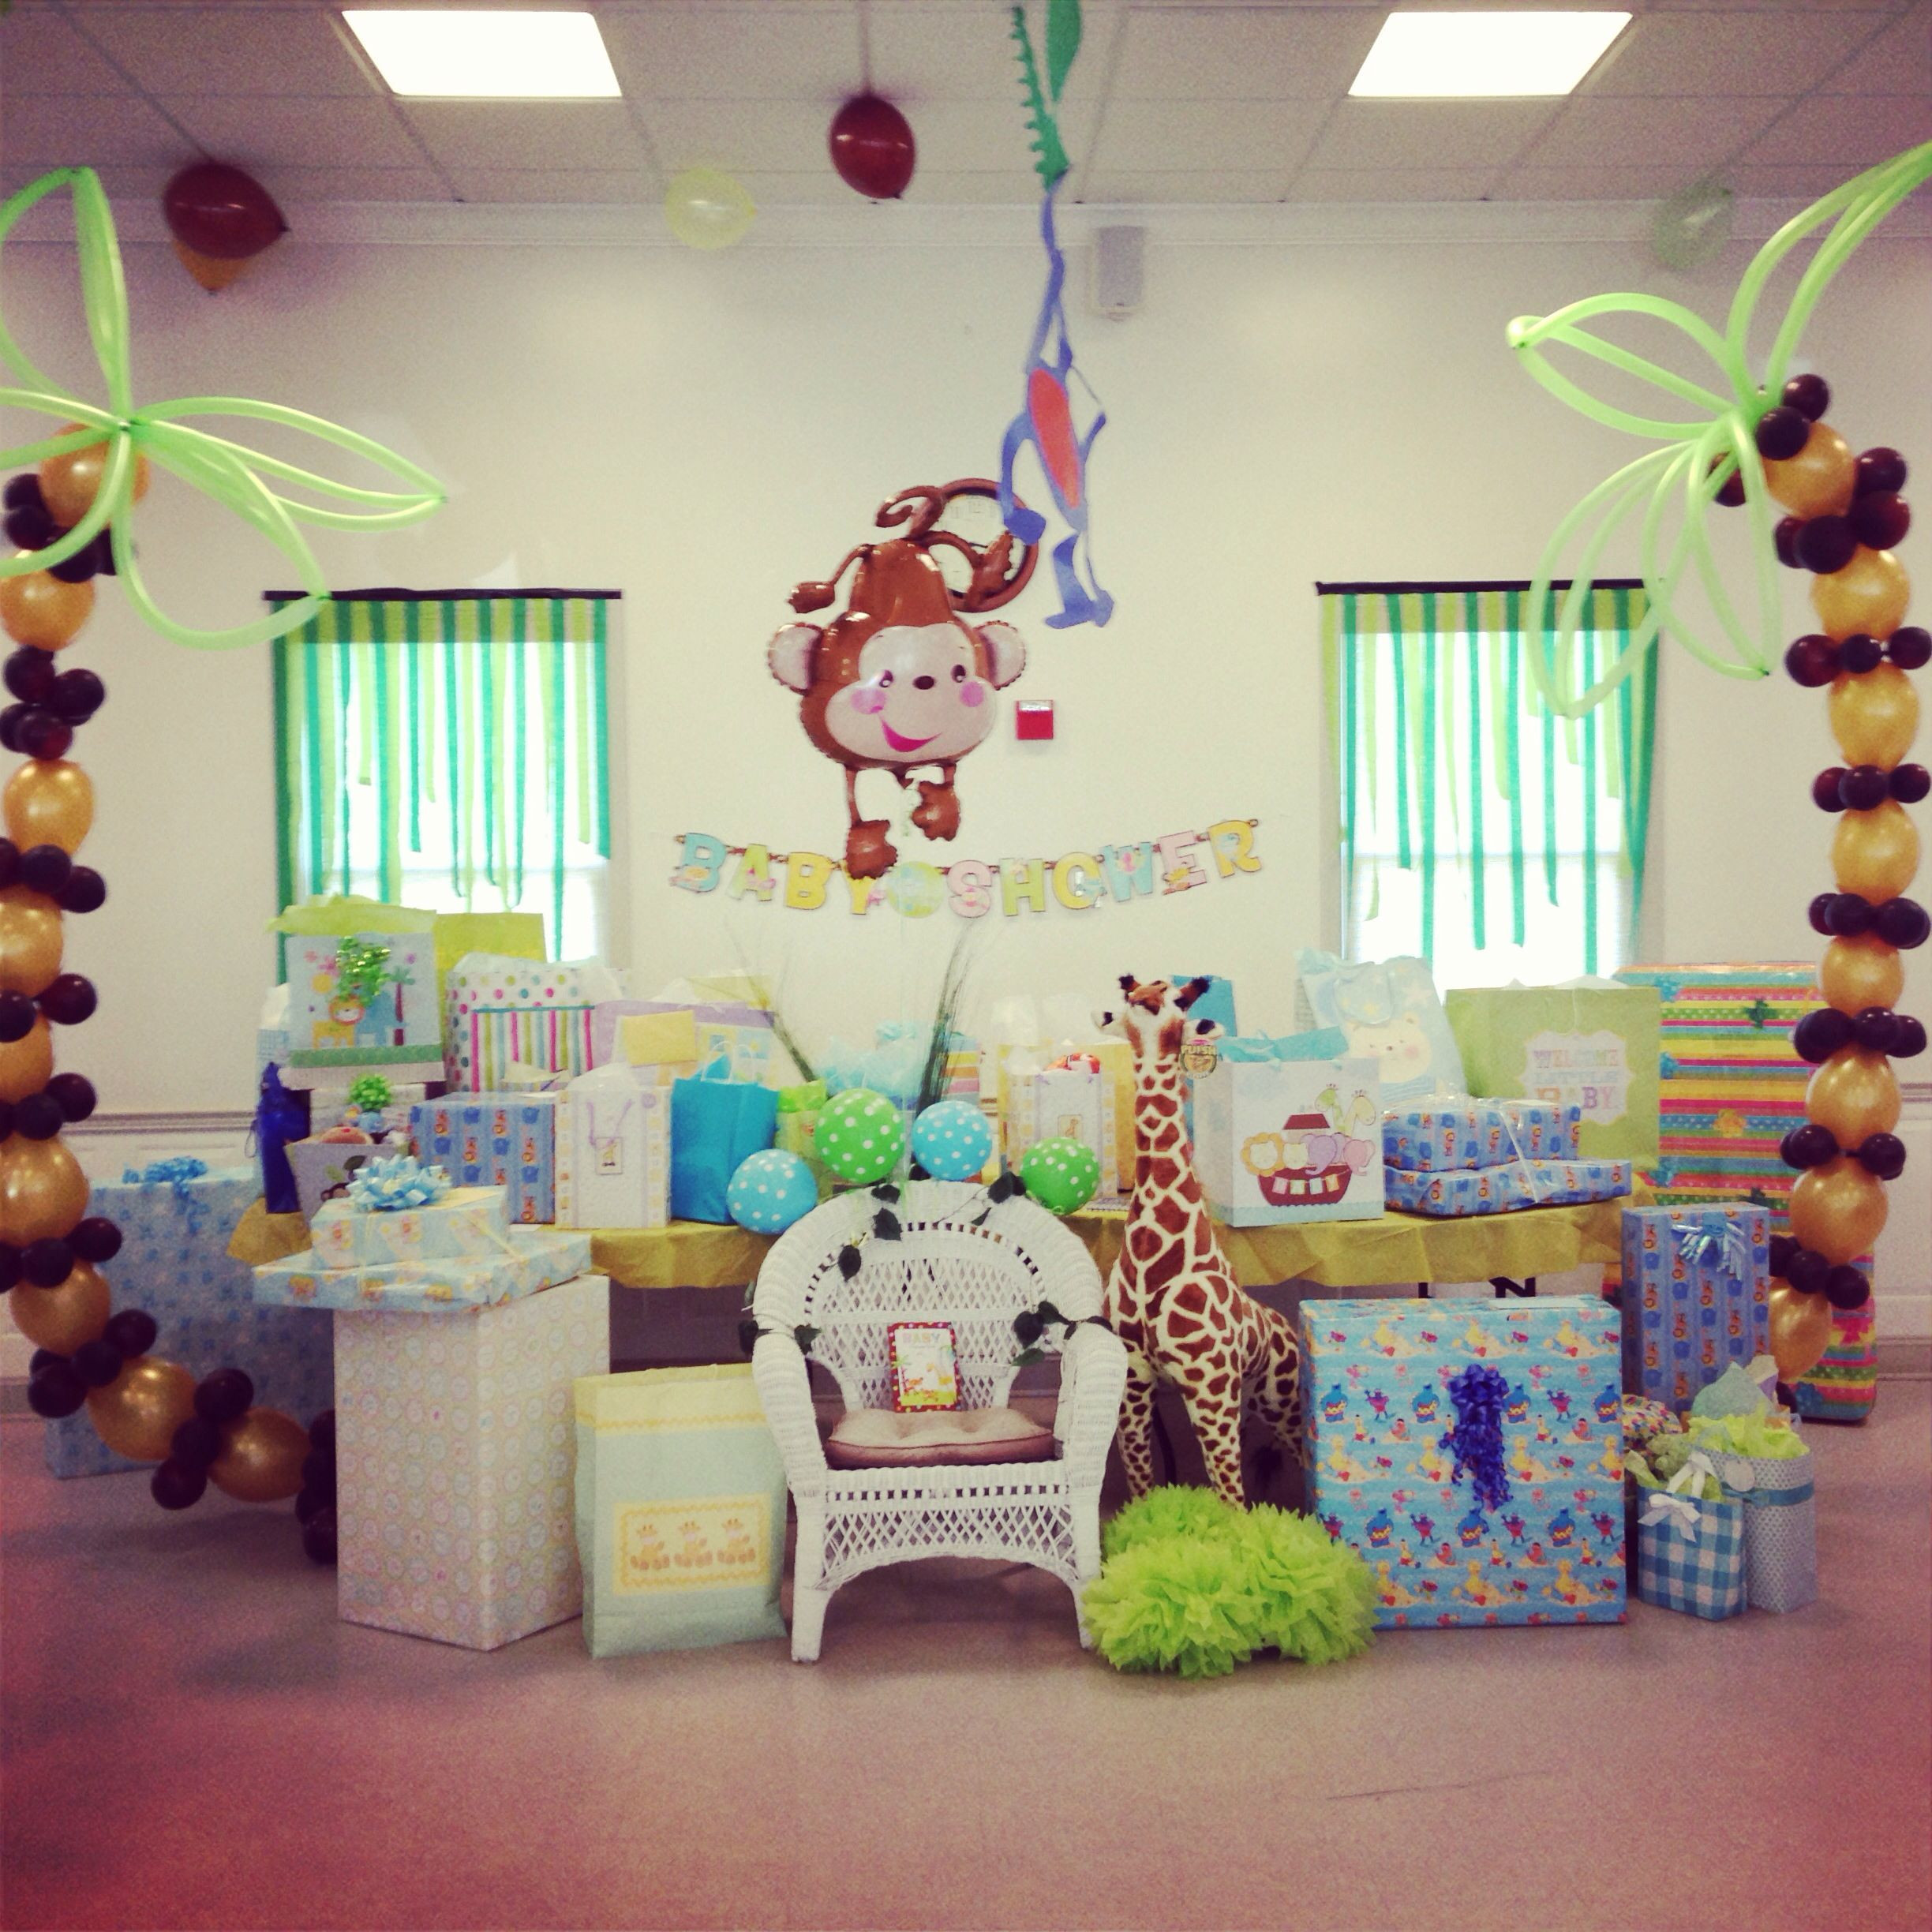 Gift Table Baby Shower Ideas
 Gift table jungle themed baby shower in 2019